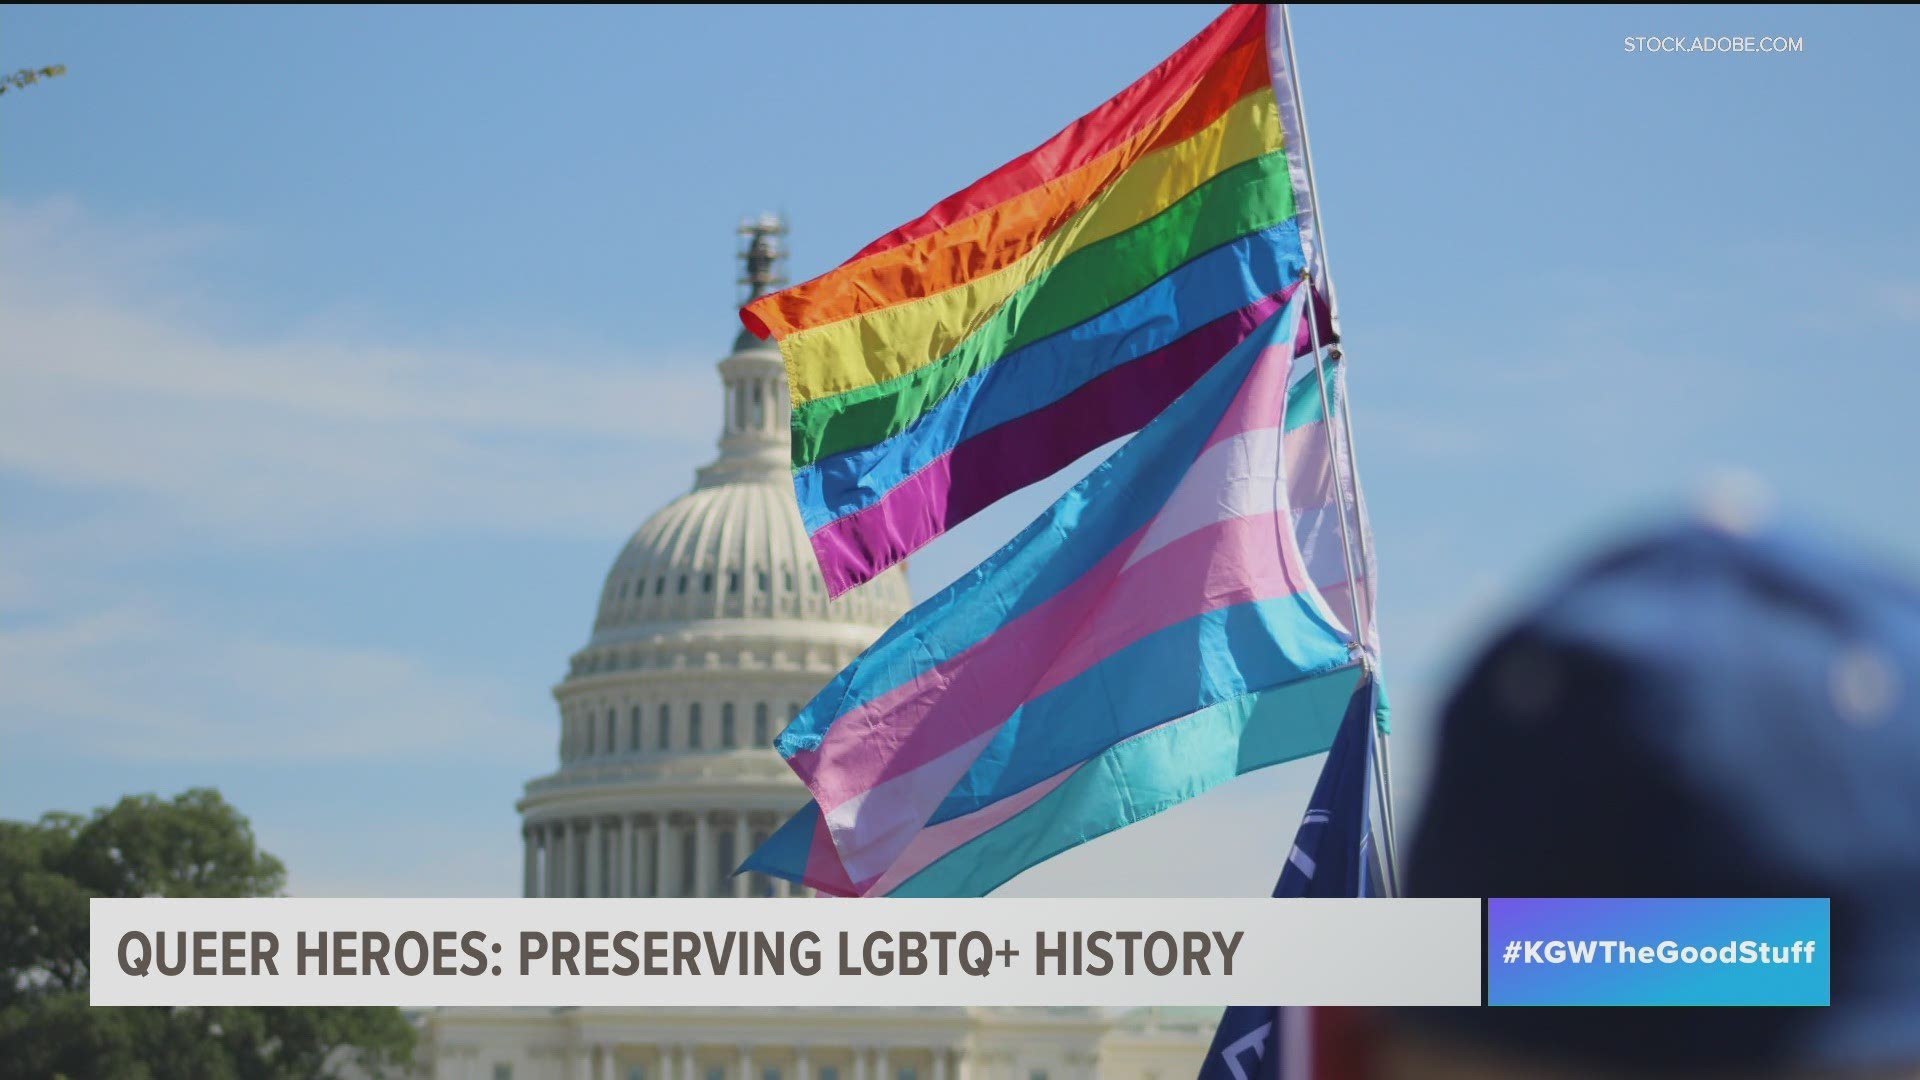 A group supported by the Oregon Historical Society is marking a milestone in preserving LGBTQ+ history. Galen Ettlin reports.